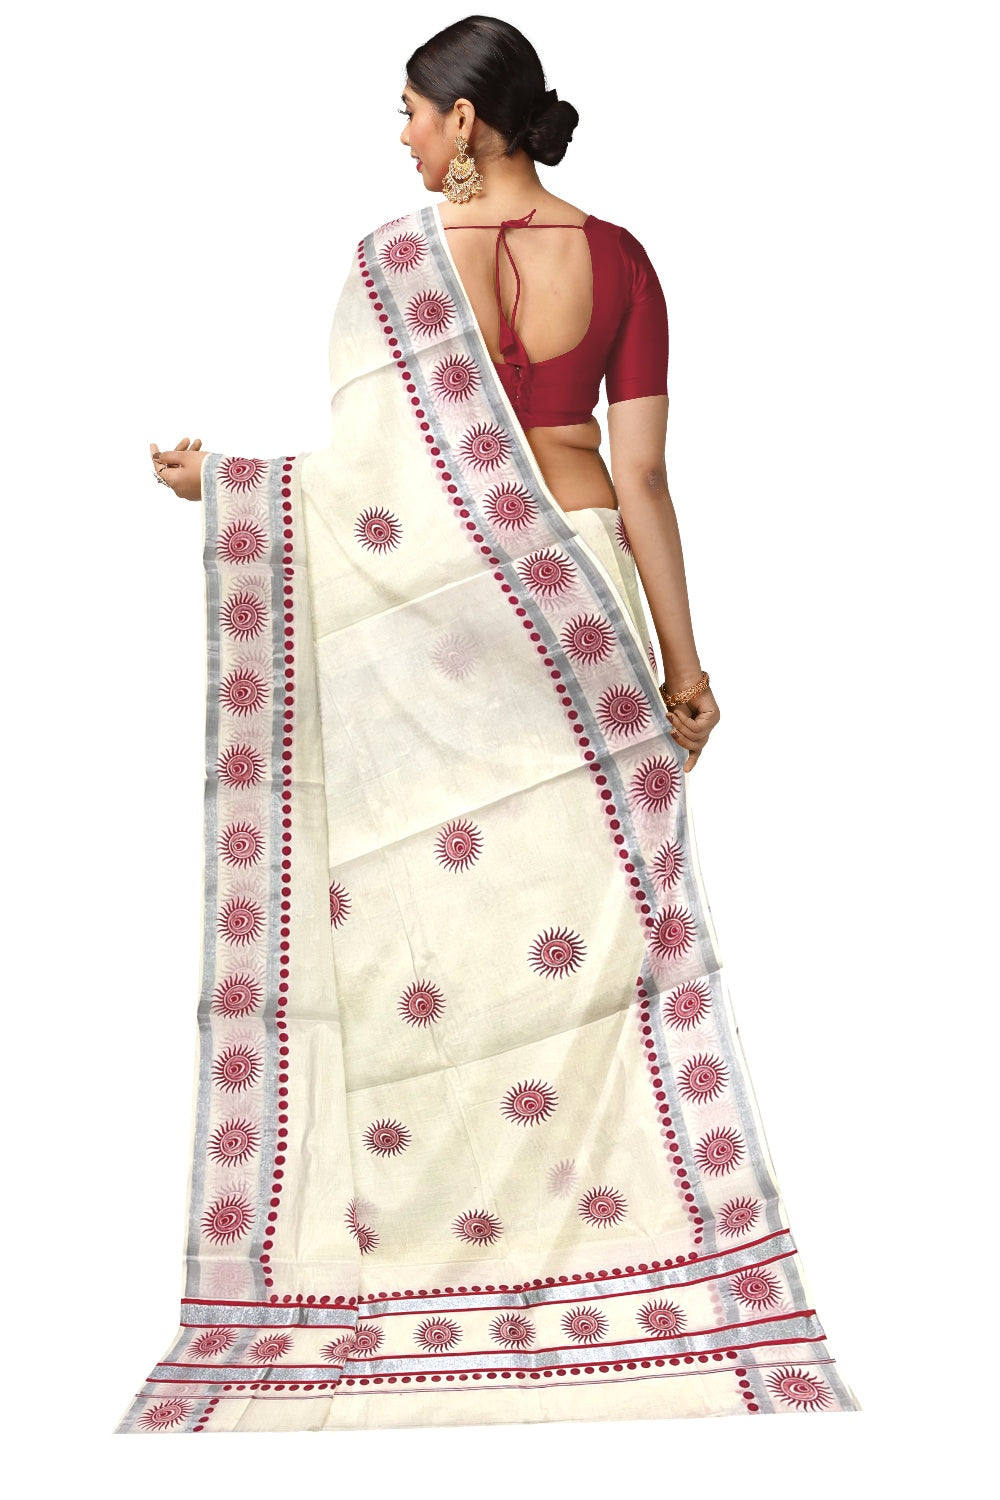 Pure Cotton Kerala Saree with Silver Kasavu Red Block Prints on Border and Tassels Works